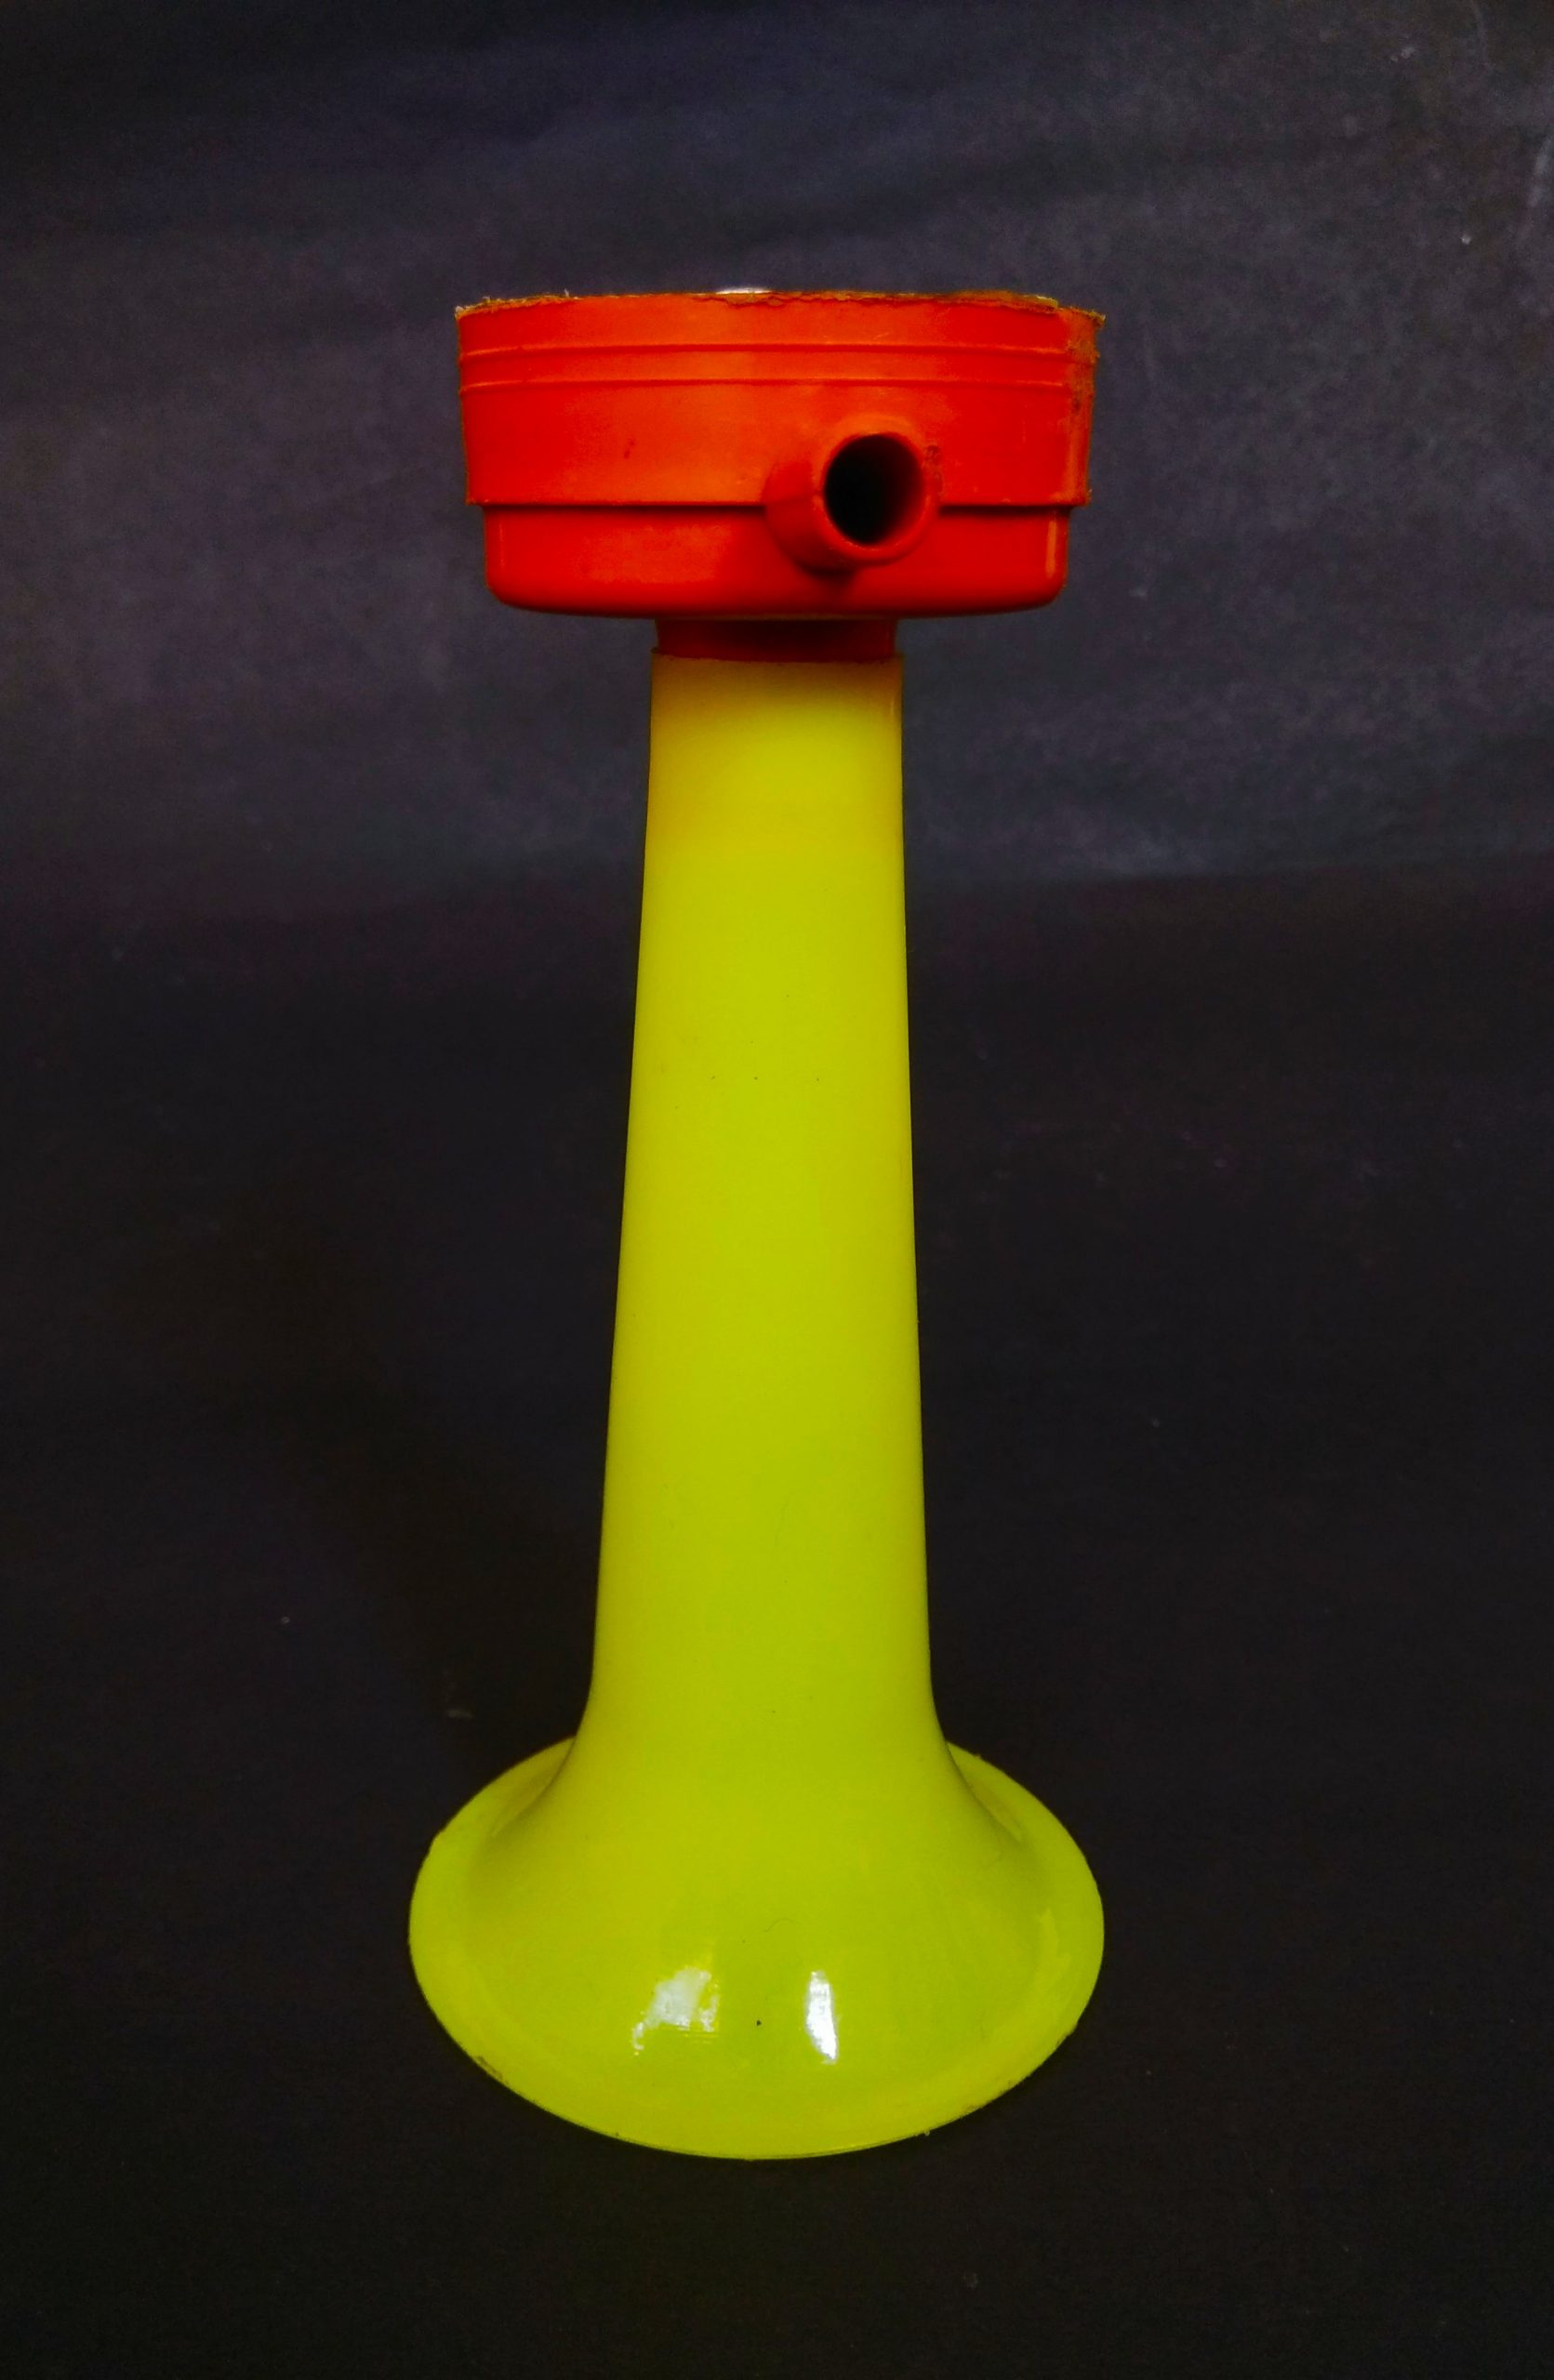 A toy trumpet